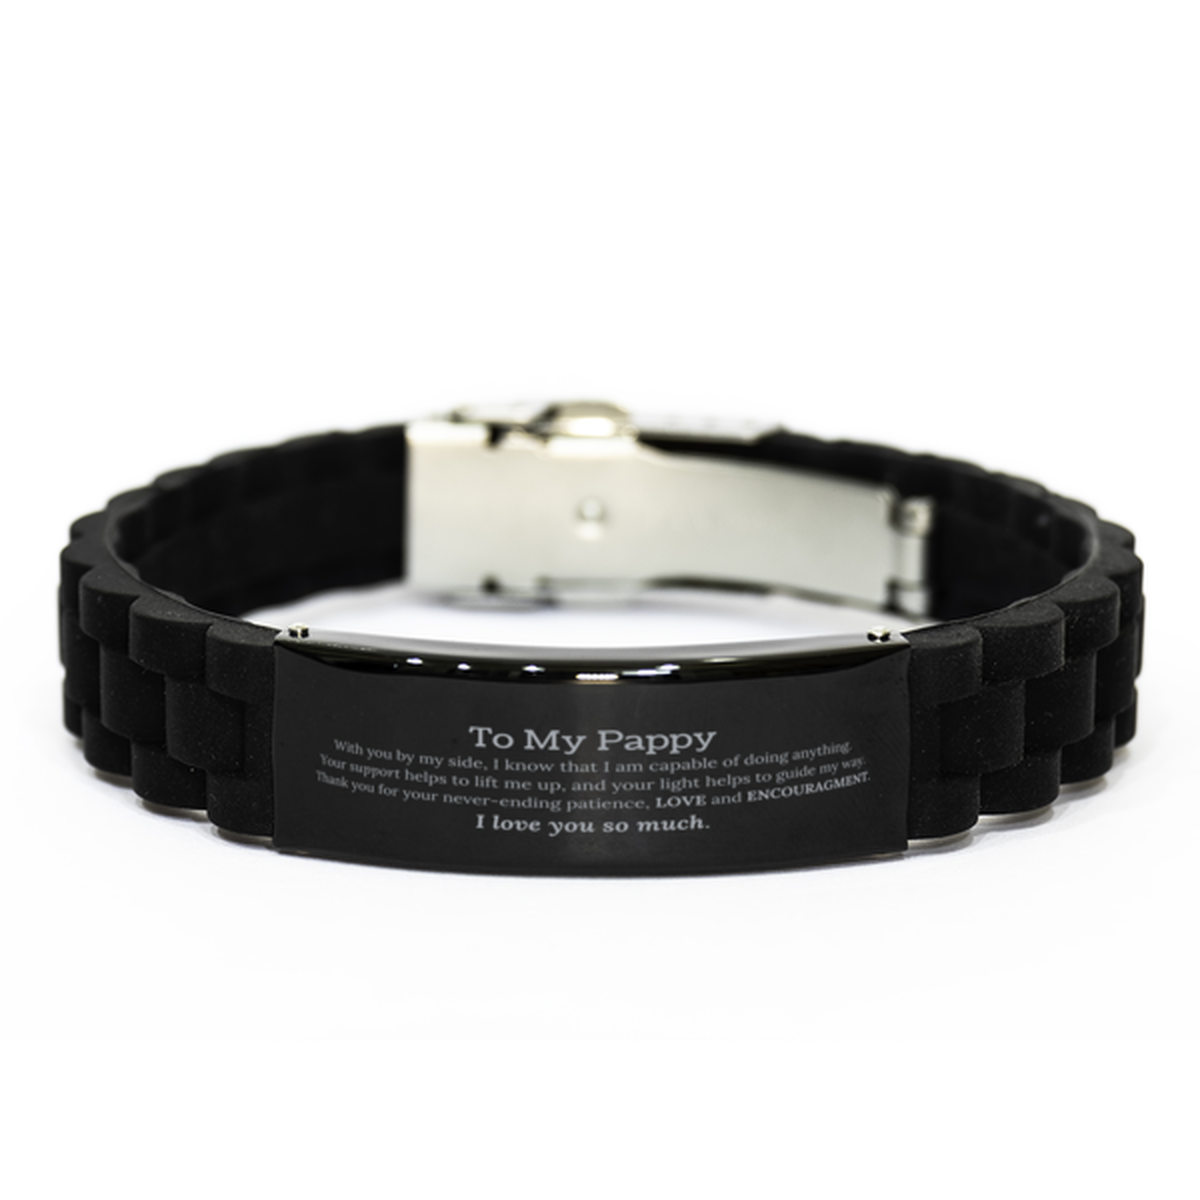 Appreciation Pappy Black Glidelock Clasp Bracelet Gifts, To My Pappy Birthday Christmas Wedding Keepsake Gifts for Pappy With you by my side, I know that I am capable of doing anything. I love you so much